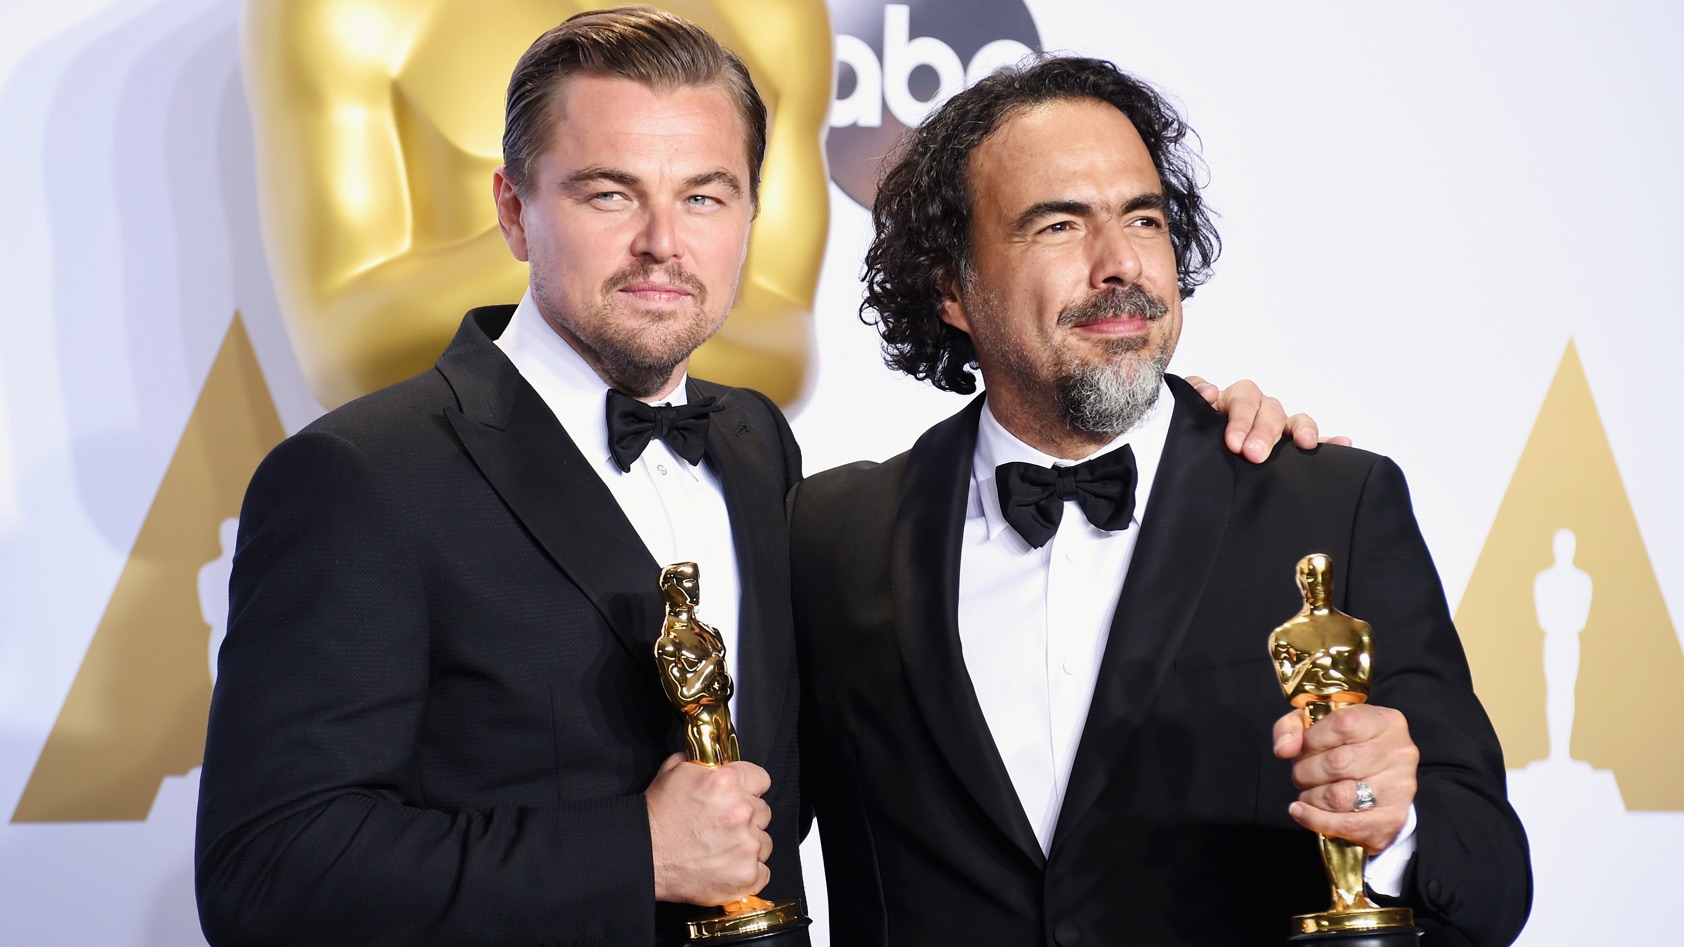 Why chasing Oscars is bad for business